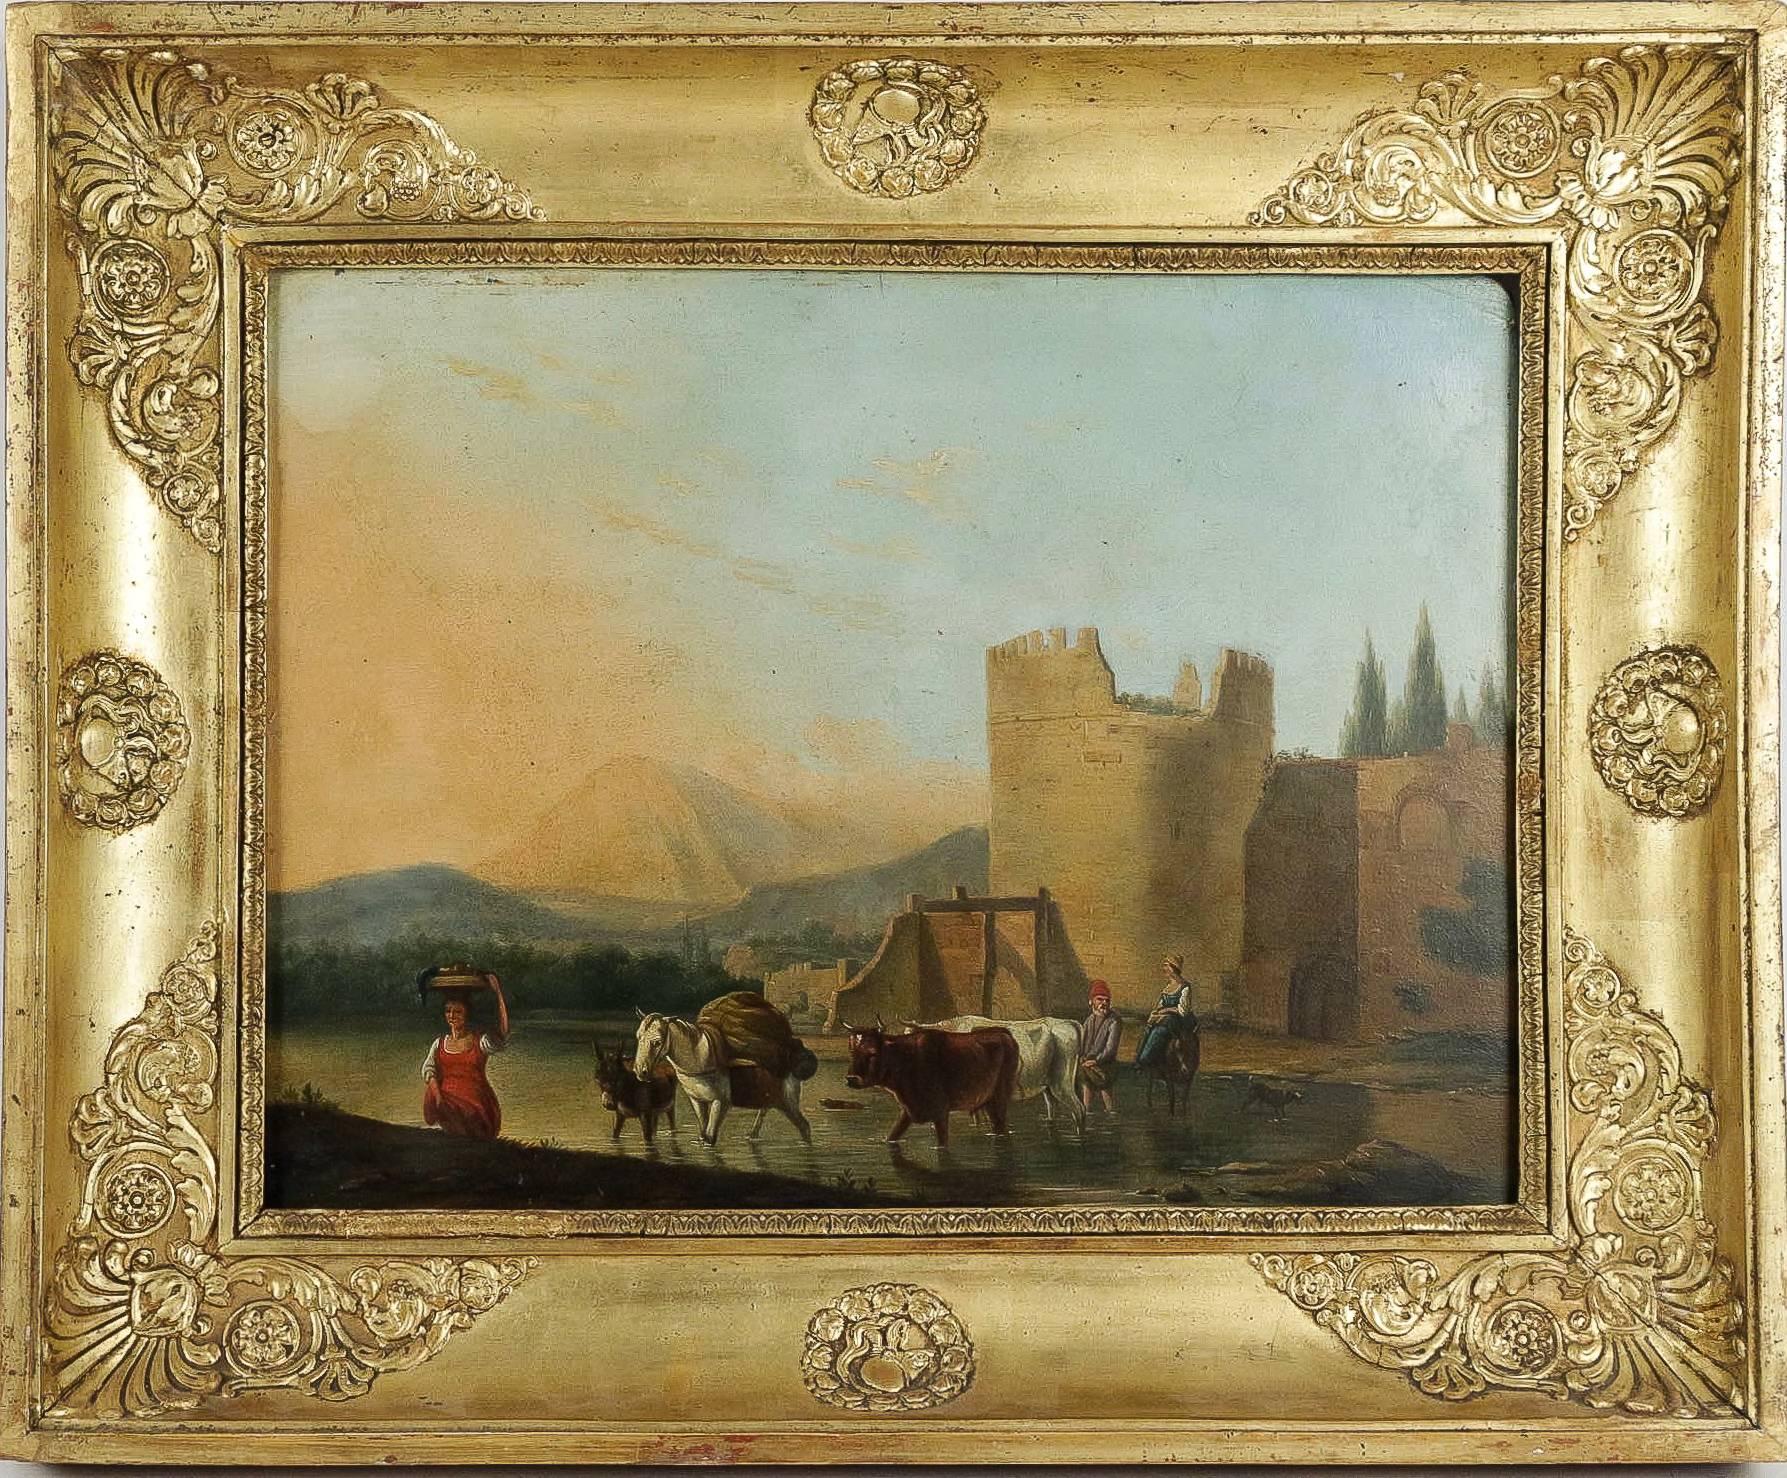 A lovely Romantic Italian painting. Oil on panel depicting “an Italian rural landscape with the shepherd and the shepherdess crossing a river with their herd.”
Impressive set of colors which make this painting warm.

Original